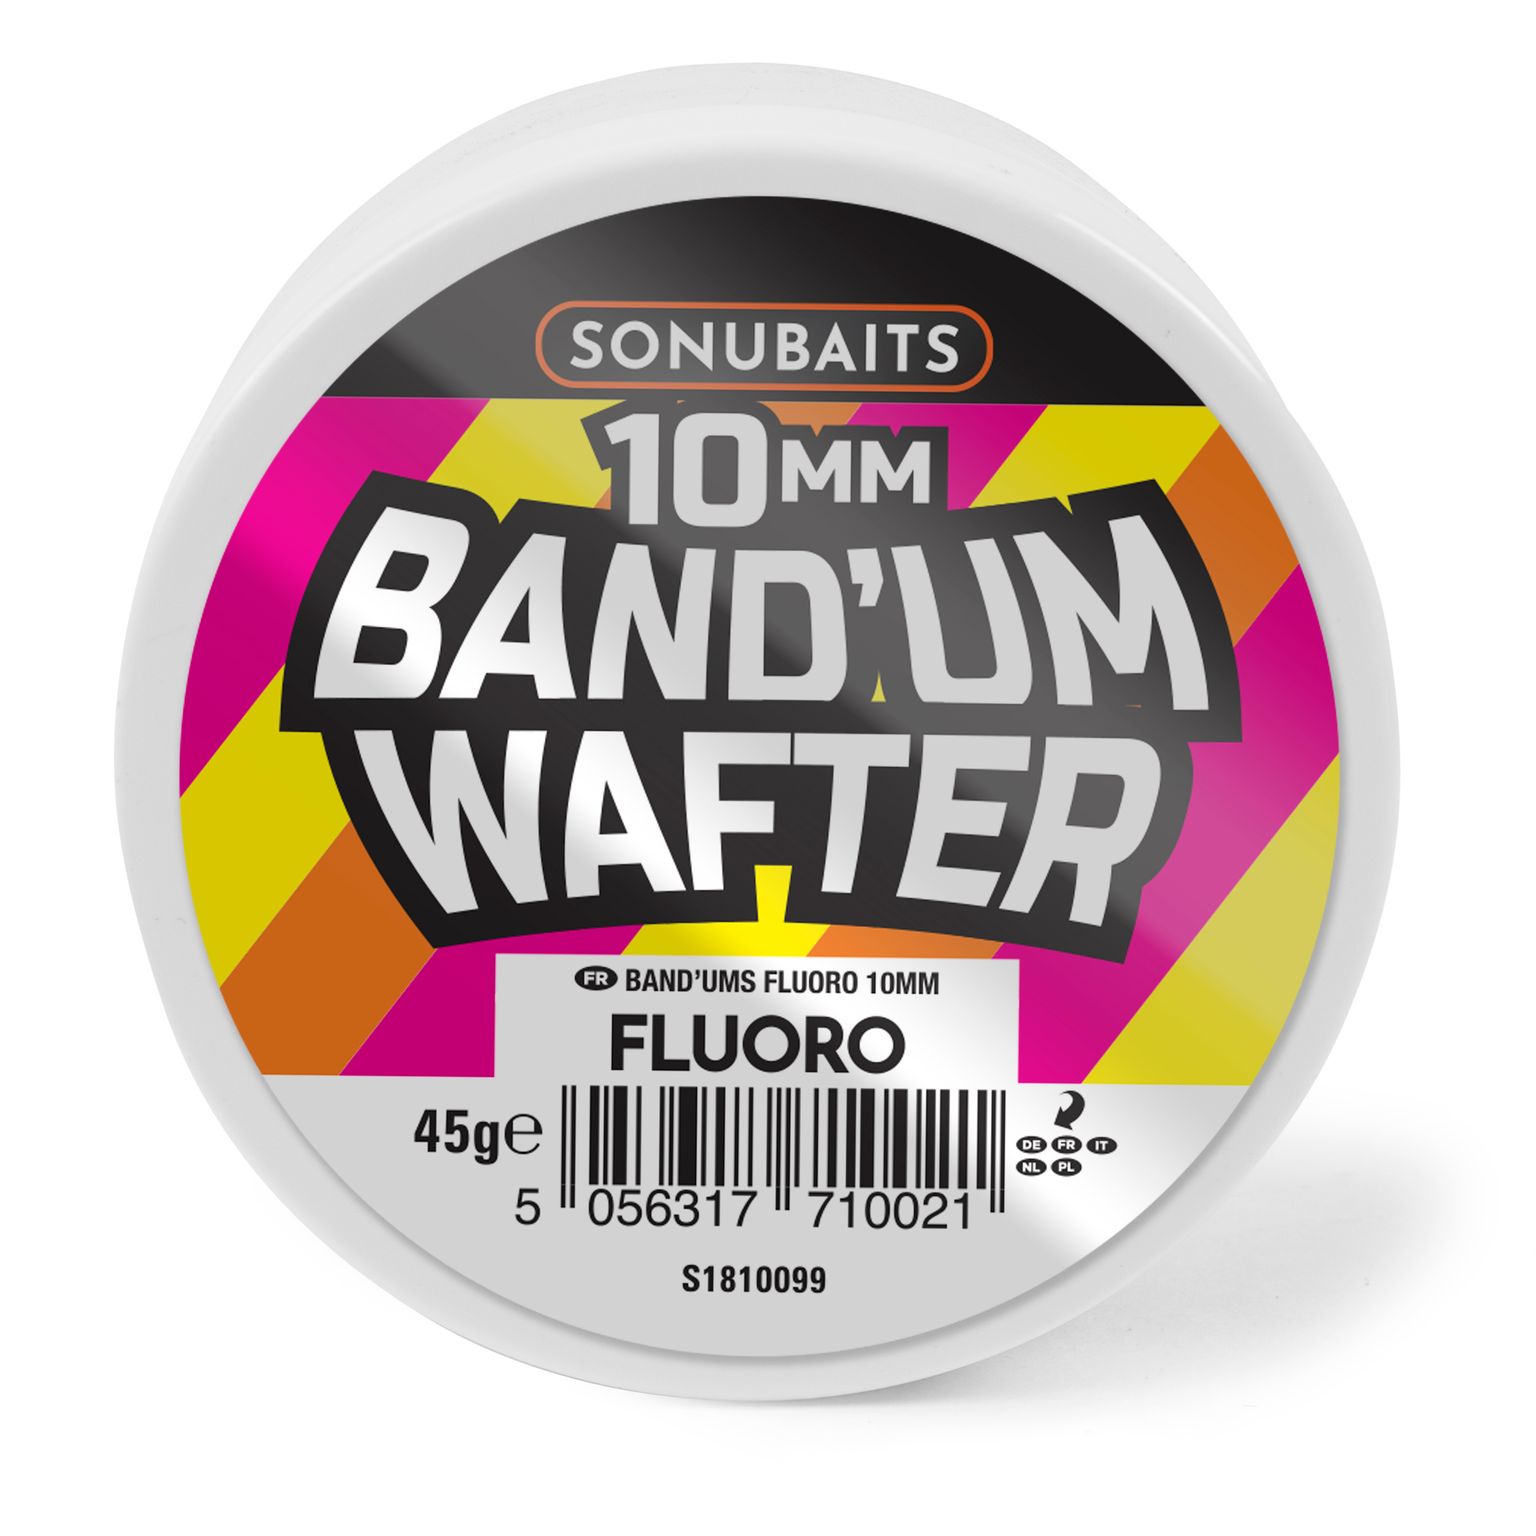 Sonubaits Band'um Wafters 10mm - Fluoro